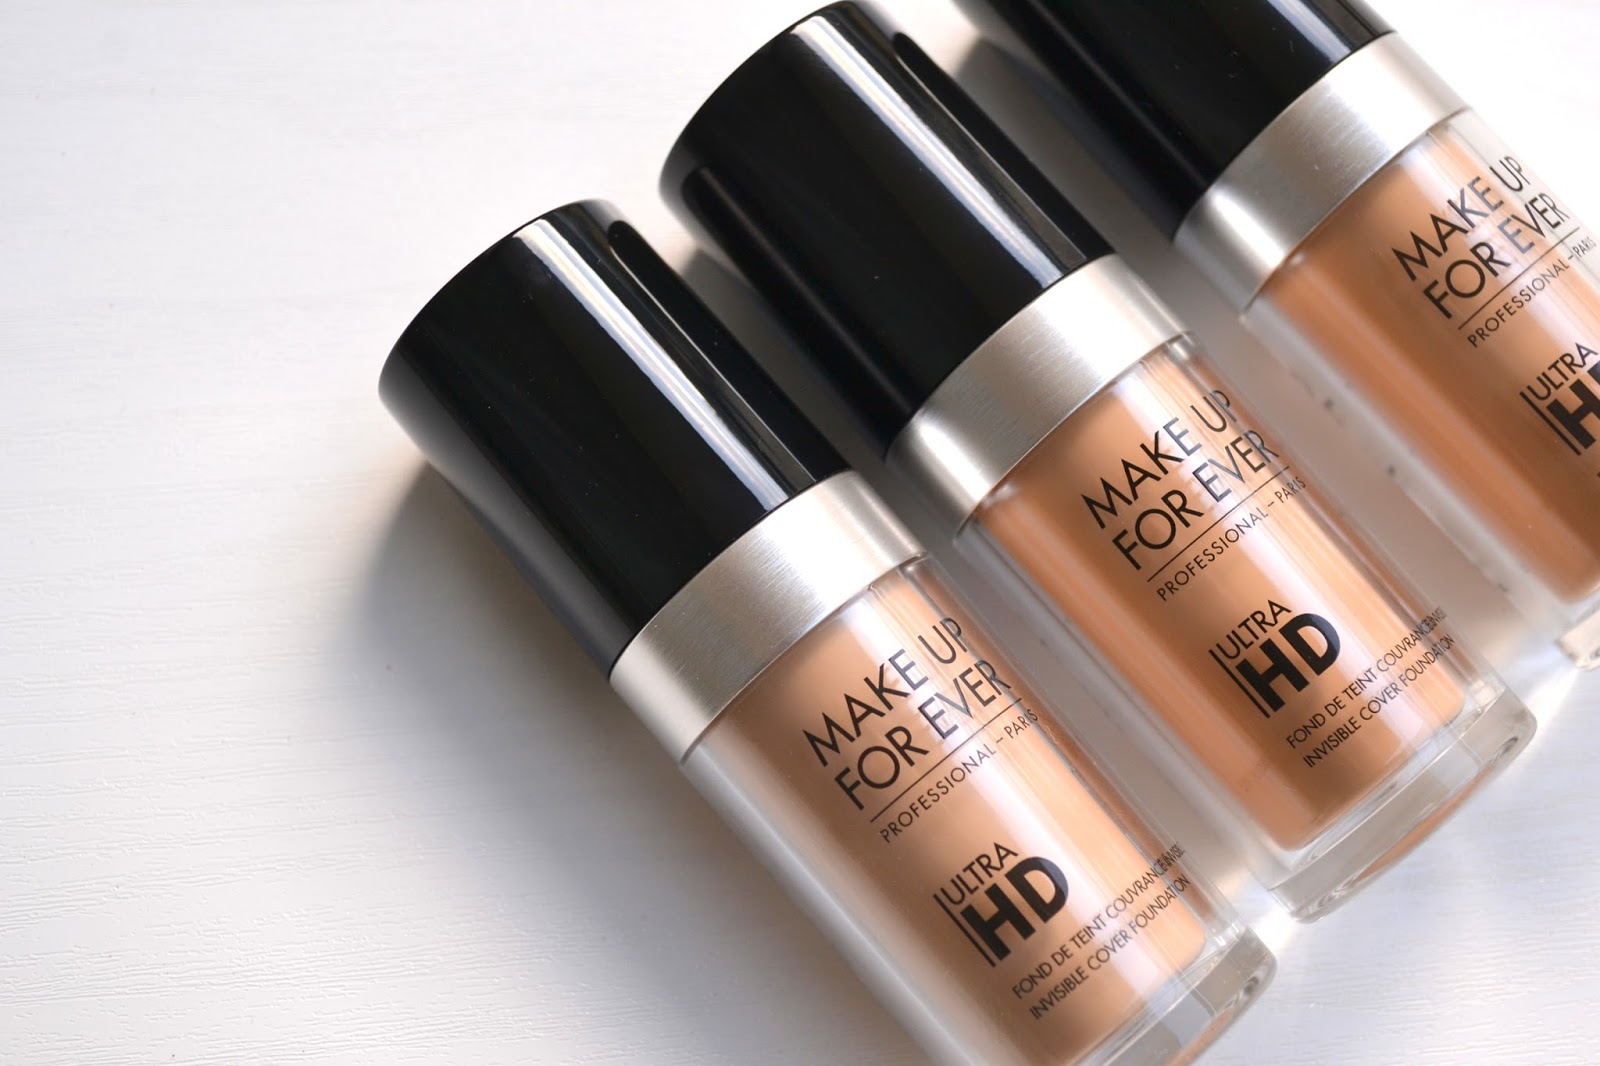 Ansøgning Tag telefonen Intim MAKEUP | Make Up For Ever Ultra HD Invisible Cover Foundation in Y235, Y245  and Y255 Review, Swatches and Pretty Face Photos | Cosmetic Proof |  Vancouver beauty, nail art and lifestyle blog